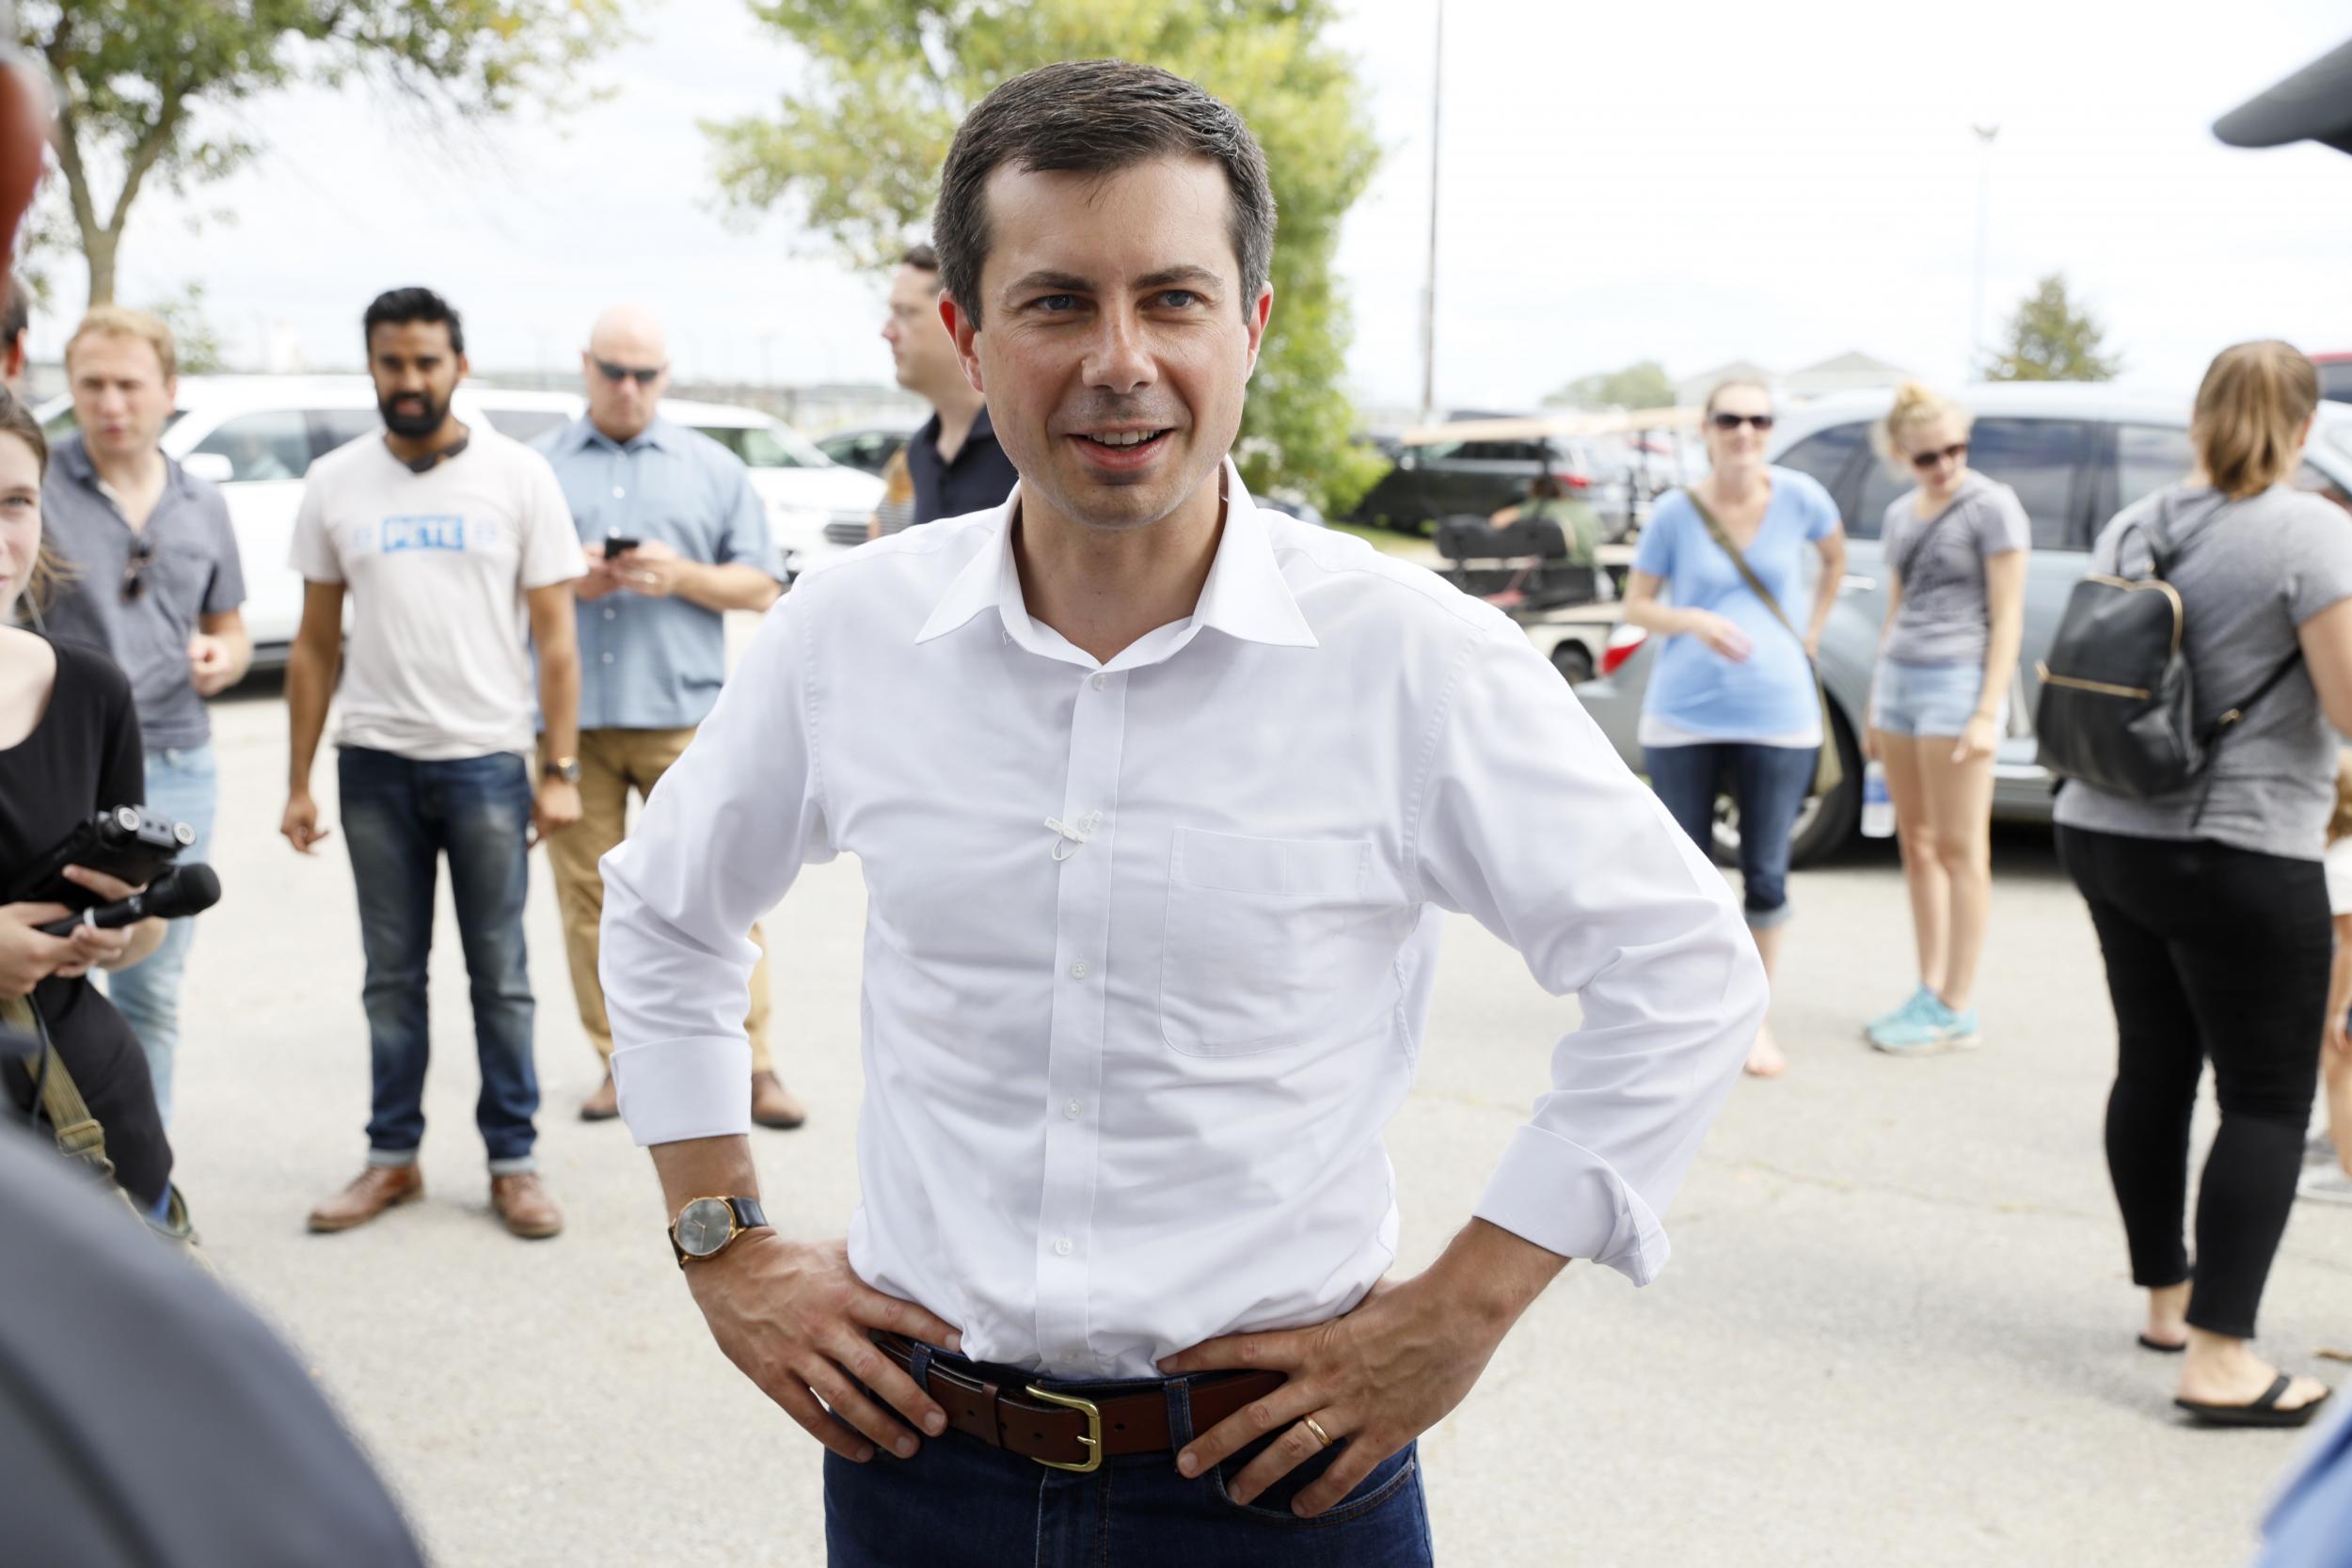 Buttigieg said at a recent CNN town hall that God would see climate change caused by human beings as a 'sin'